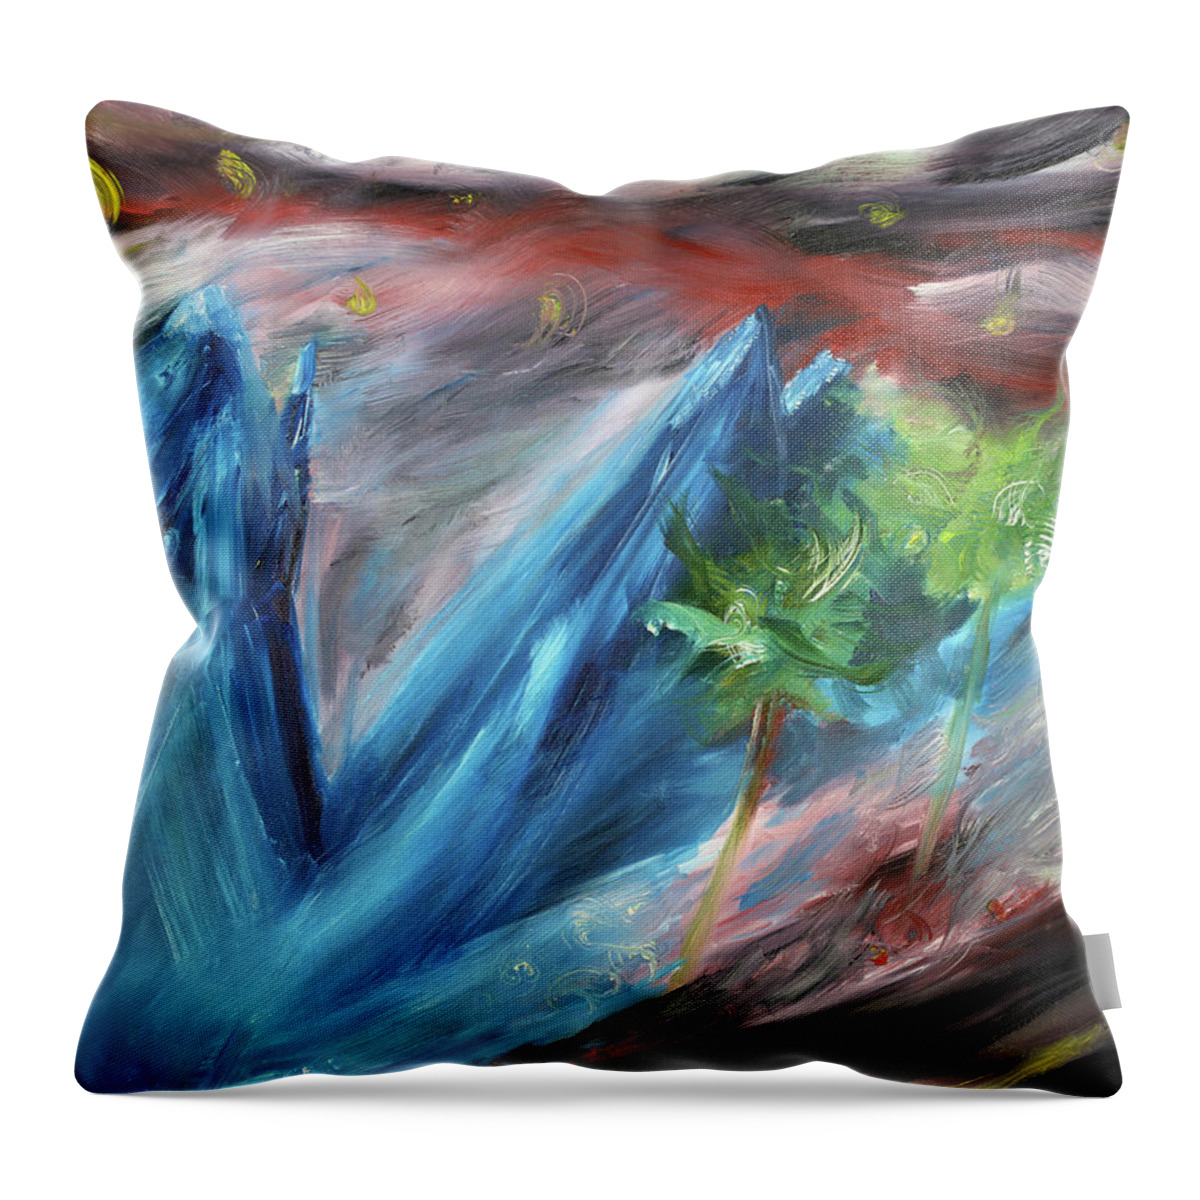 Anarchy Throw Pillow featuring the painting Storm's Chaos by K R Burks